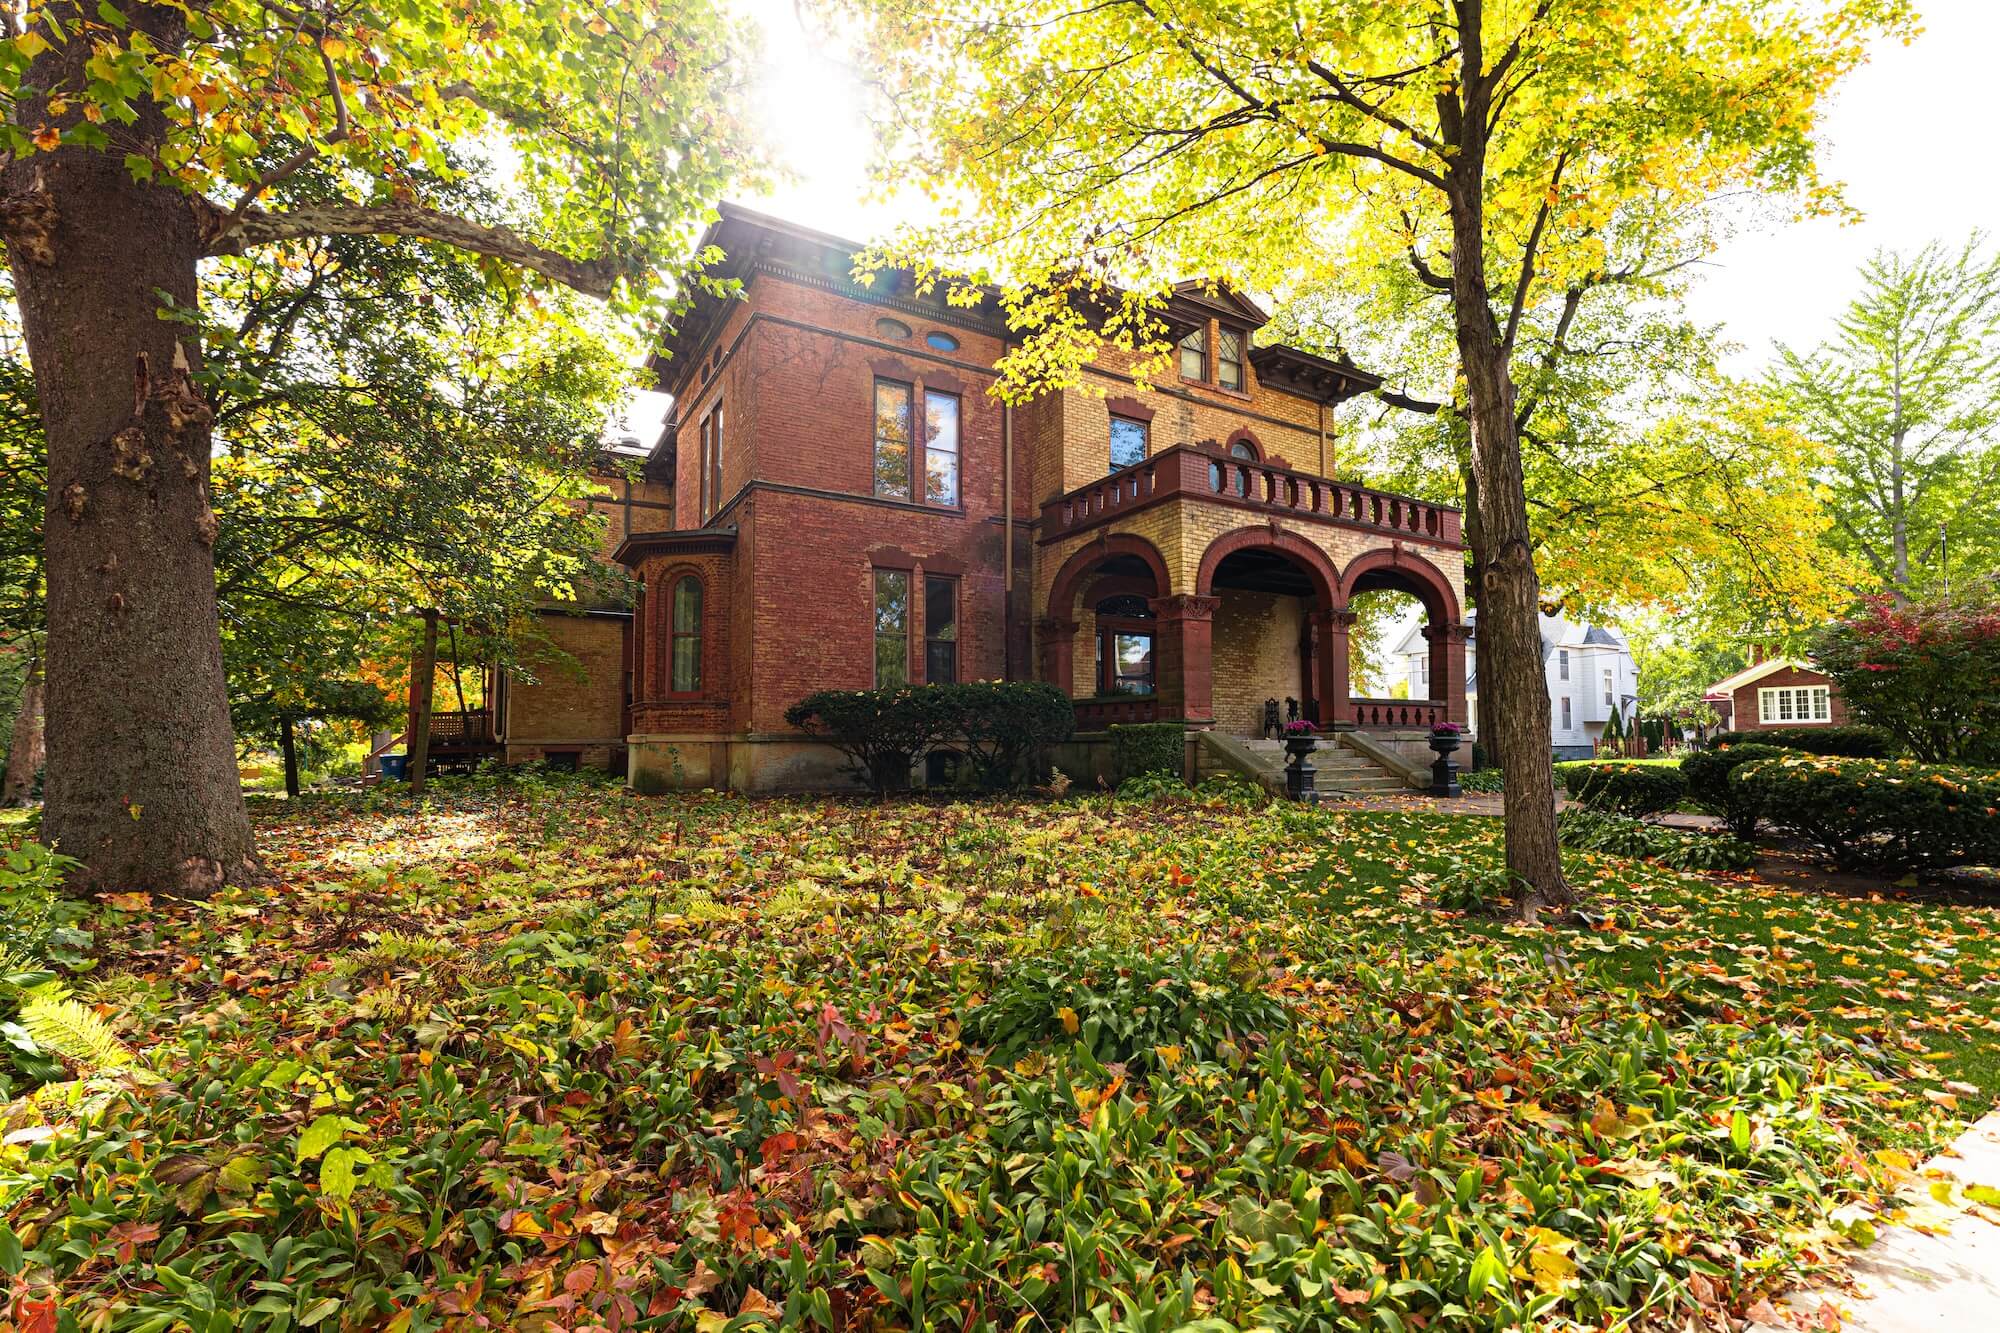 Front of the Mansion in the Fall from the East